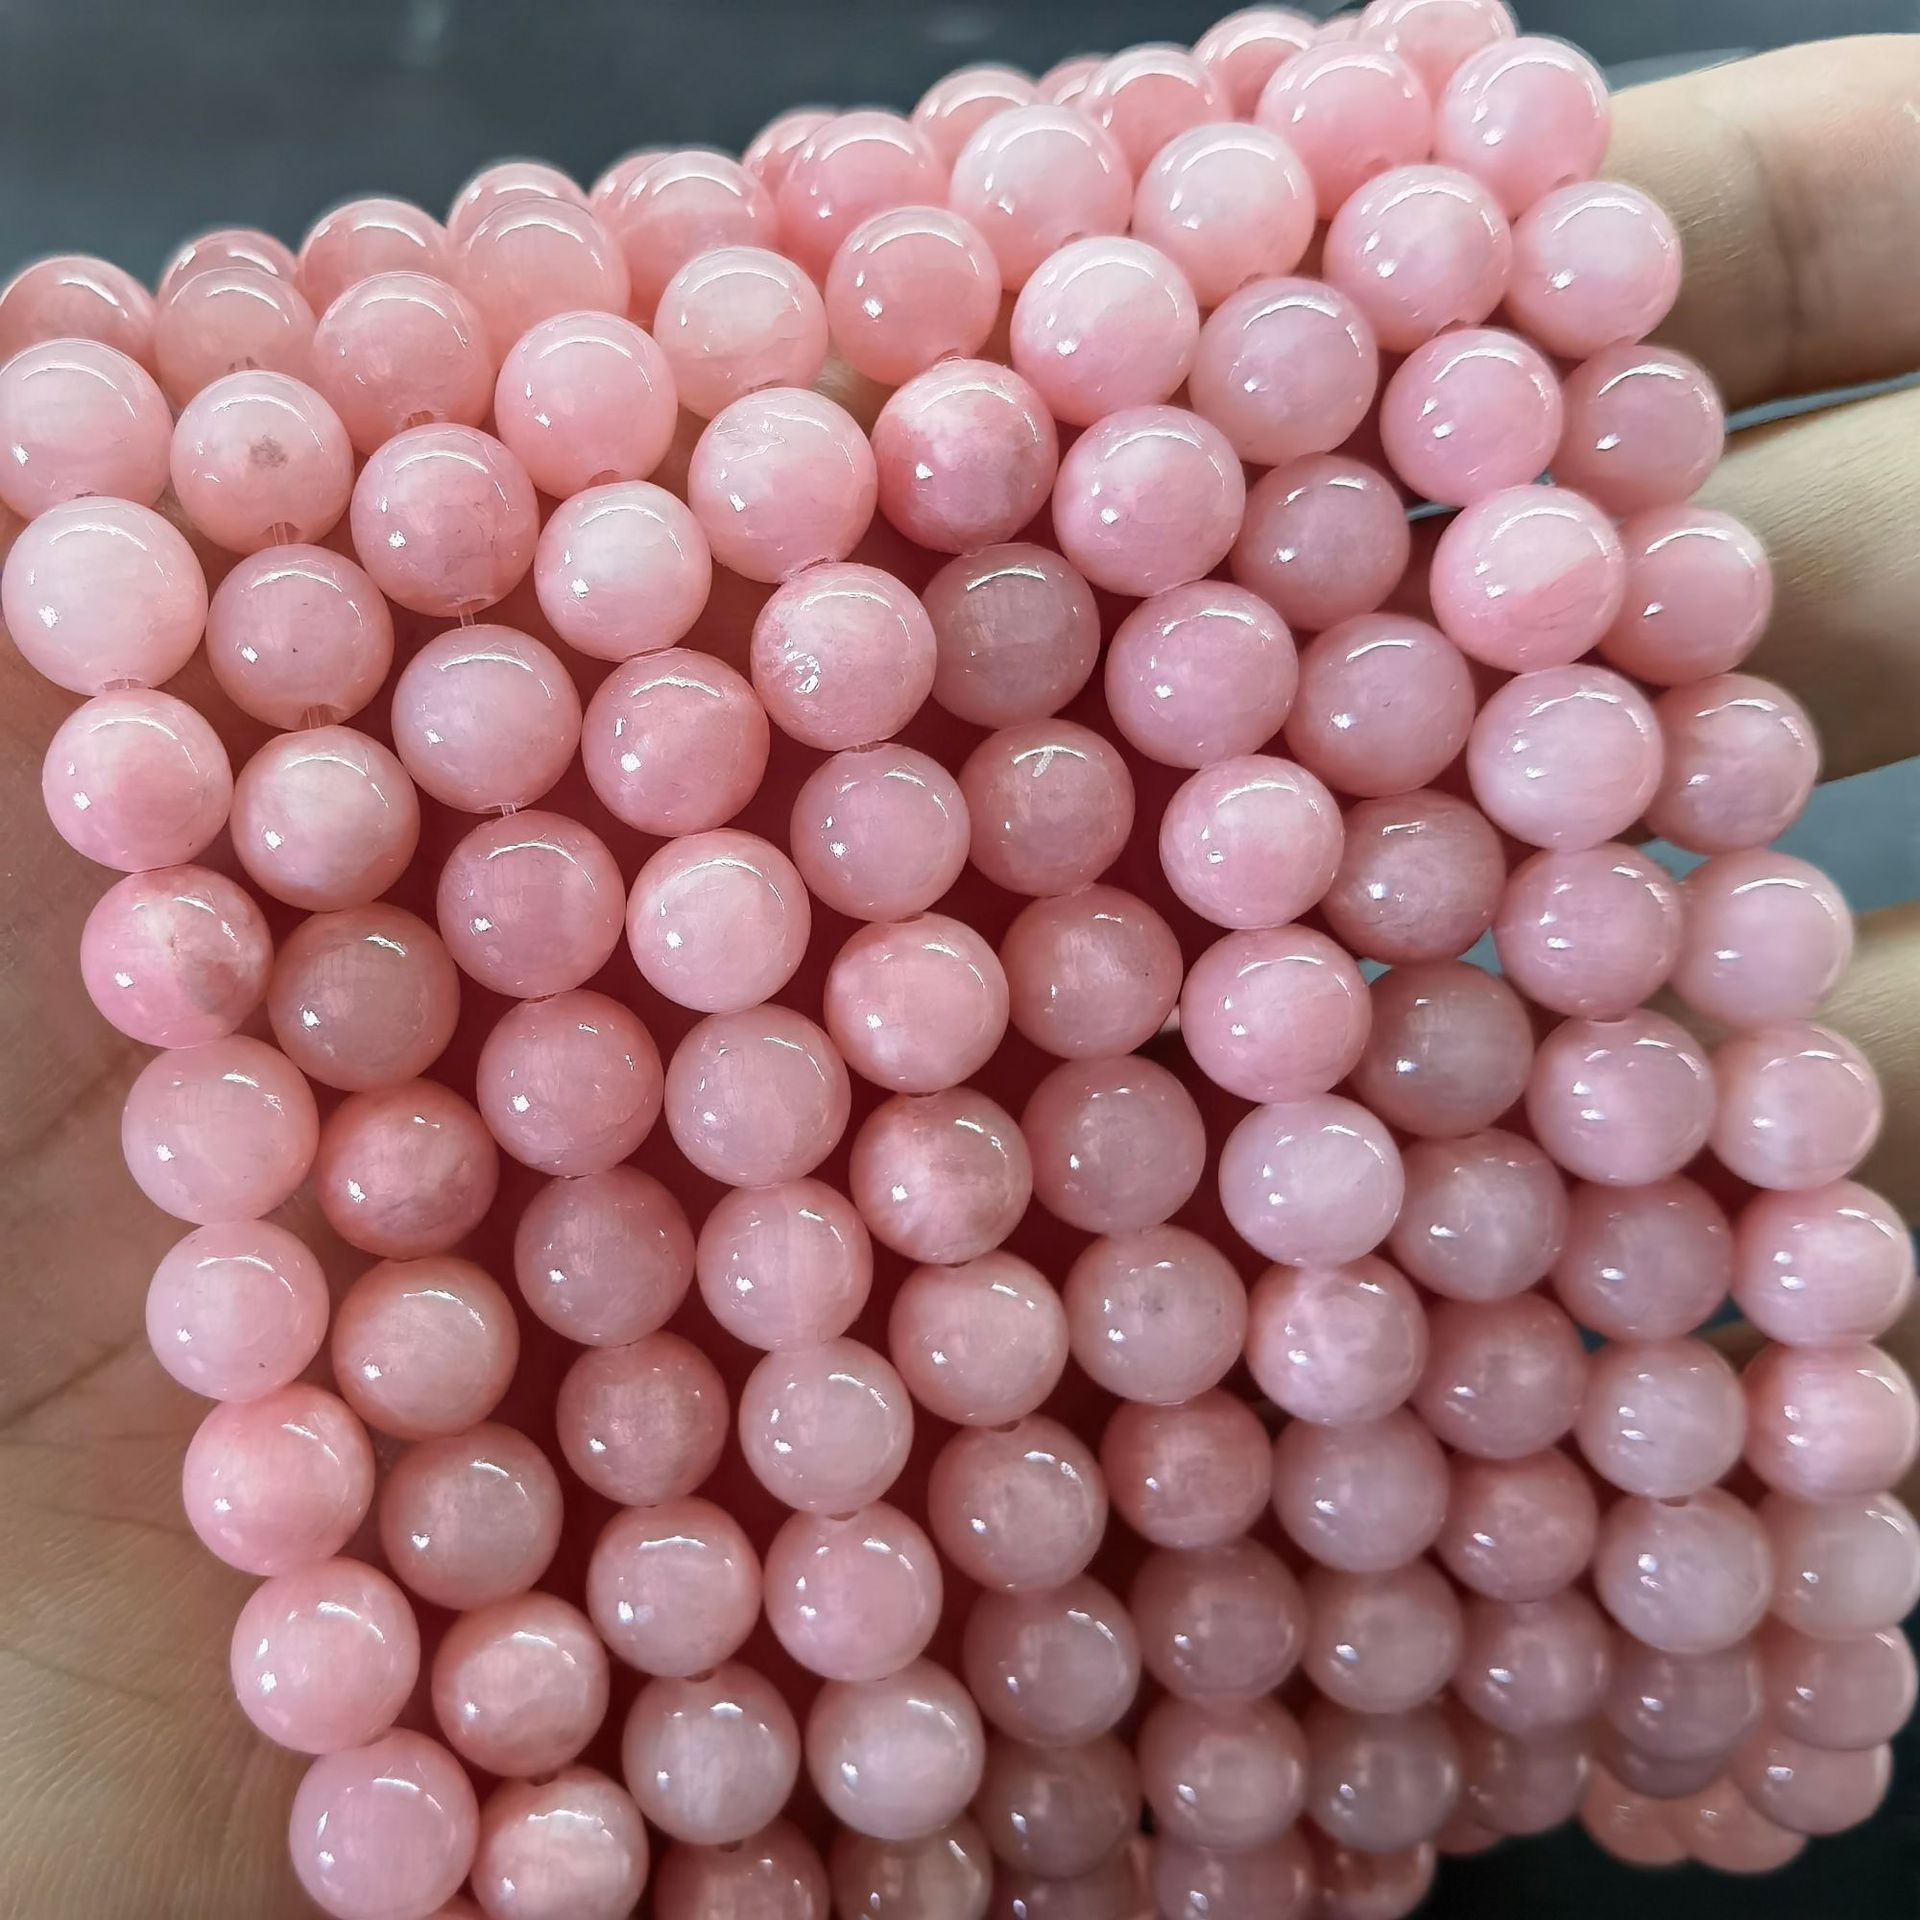 Natural Pink Crystal Rose Chalcedony Agate Scattered Beads Semi-Finished Bracelet DIY Handmade Beading Material Set Ornament Accessories